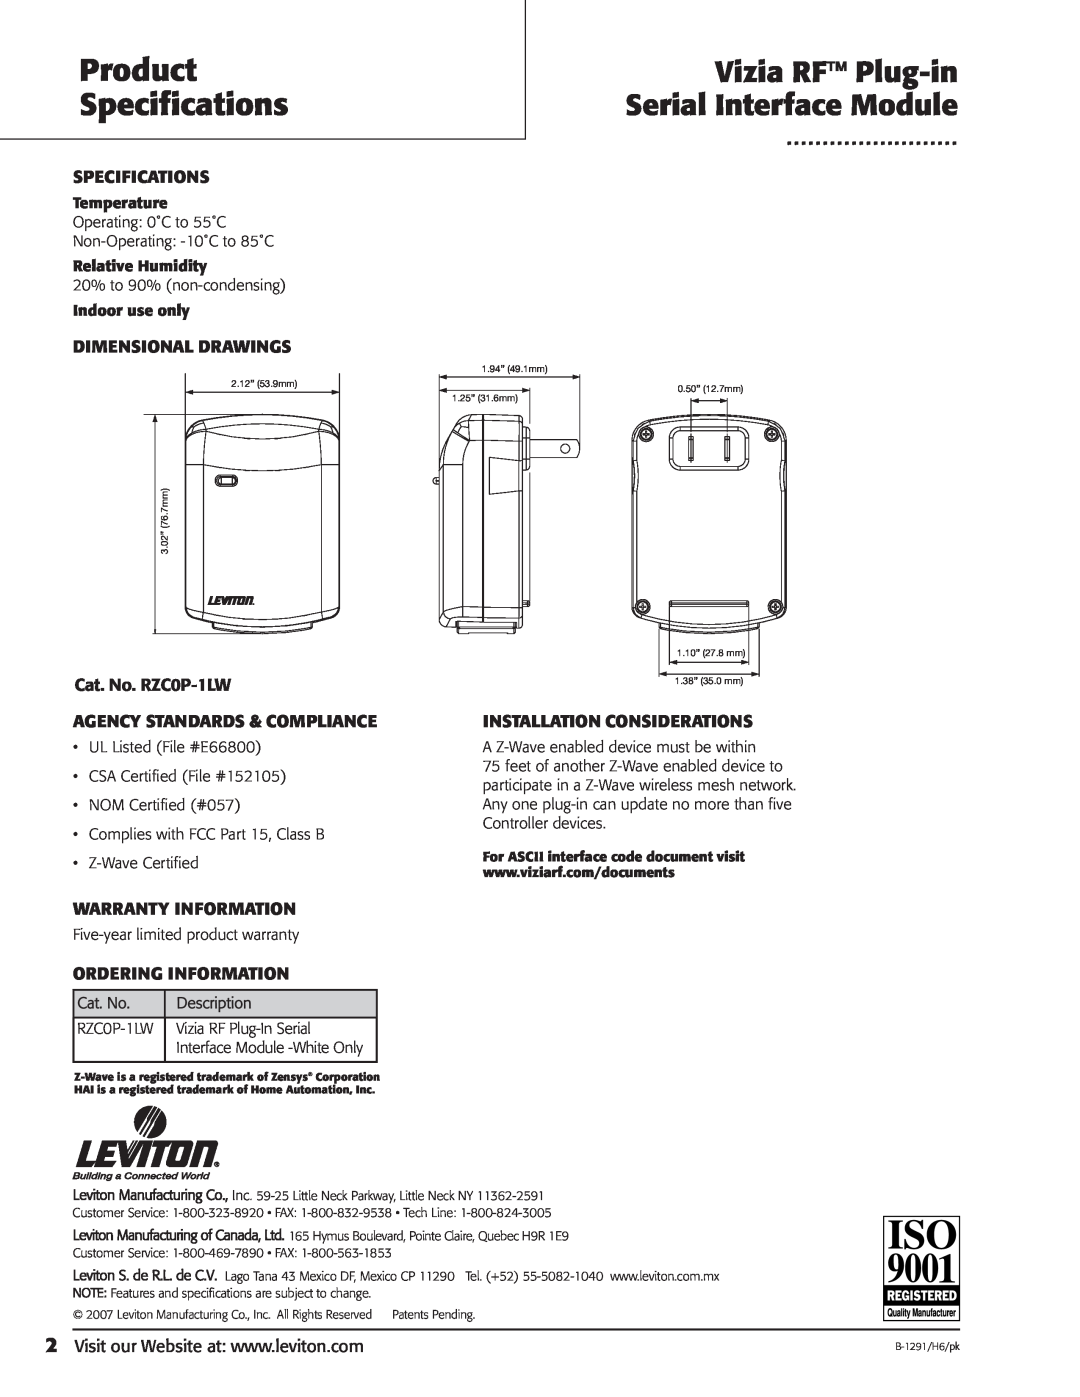 Leviton RZC0P-1LW Product Specifications, Dimensional Drawings, Agency Standards & Compliance, Installation Considerations 